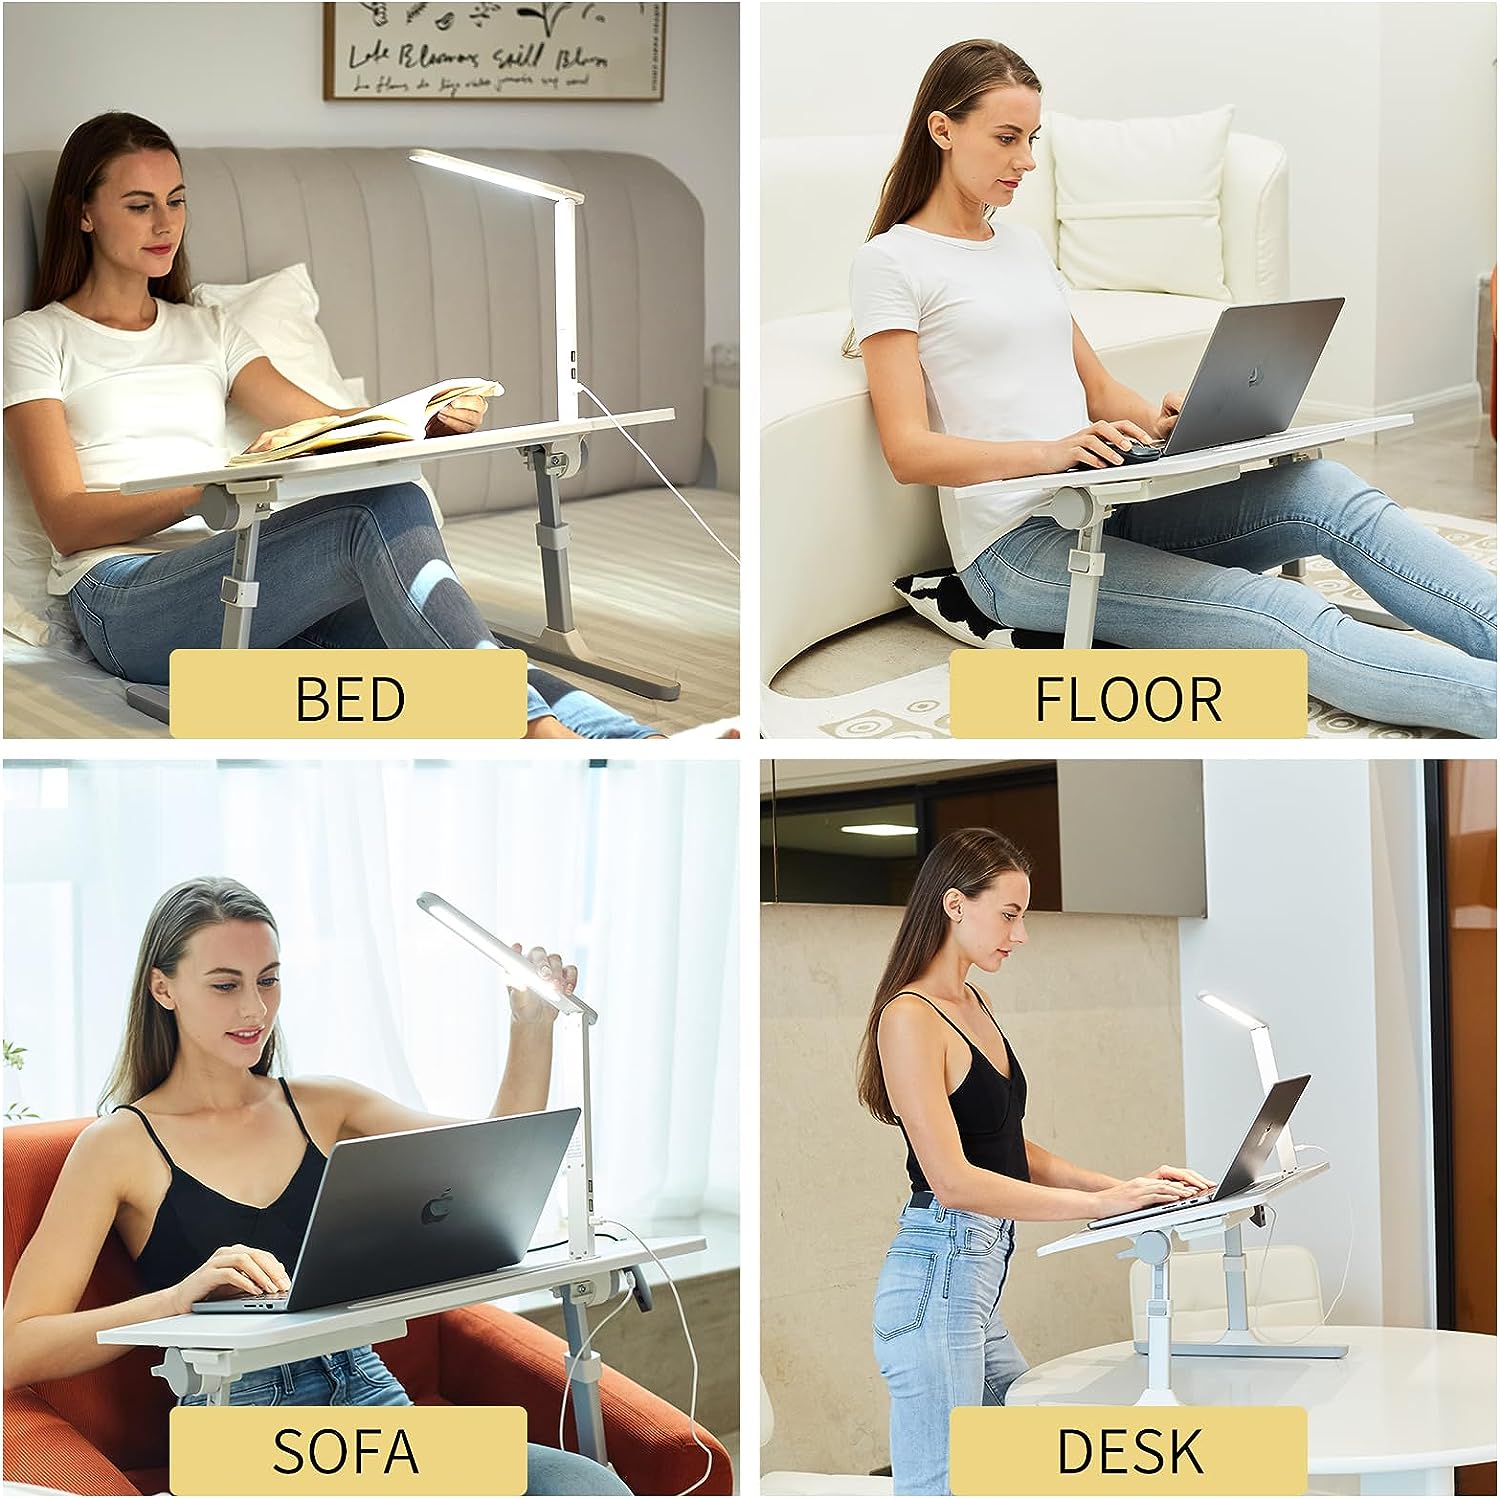 NEW Lap Desk For Laptop, Portable Bed Table Desk, Laptop Desk With LED Light And Drawer, Adjustable Laptop Stand For Bed, Sofa, Study, Reading